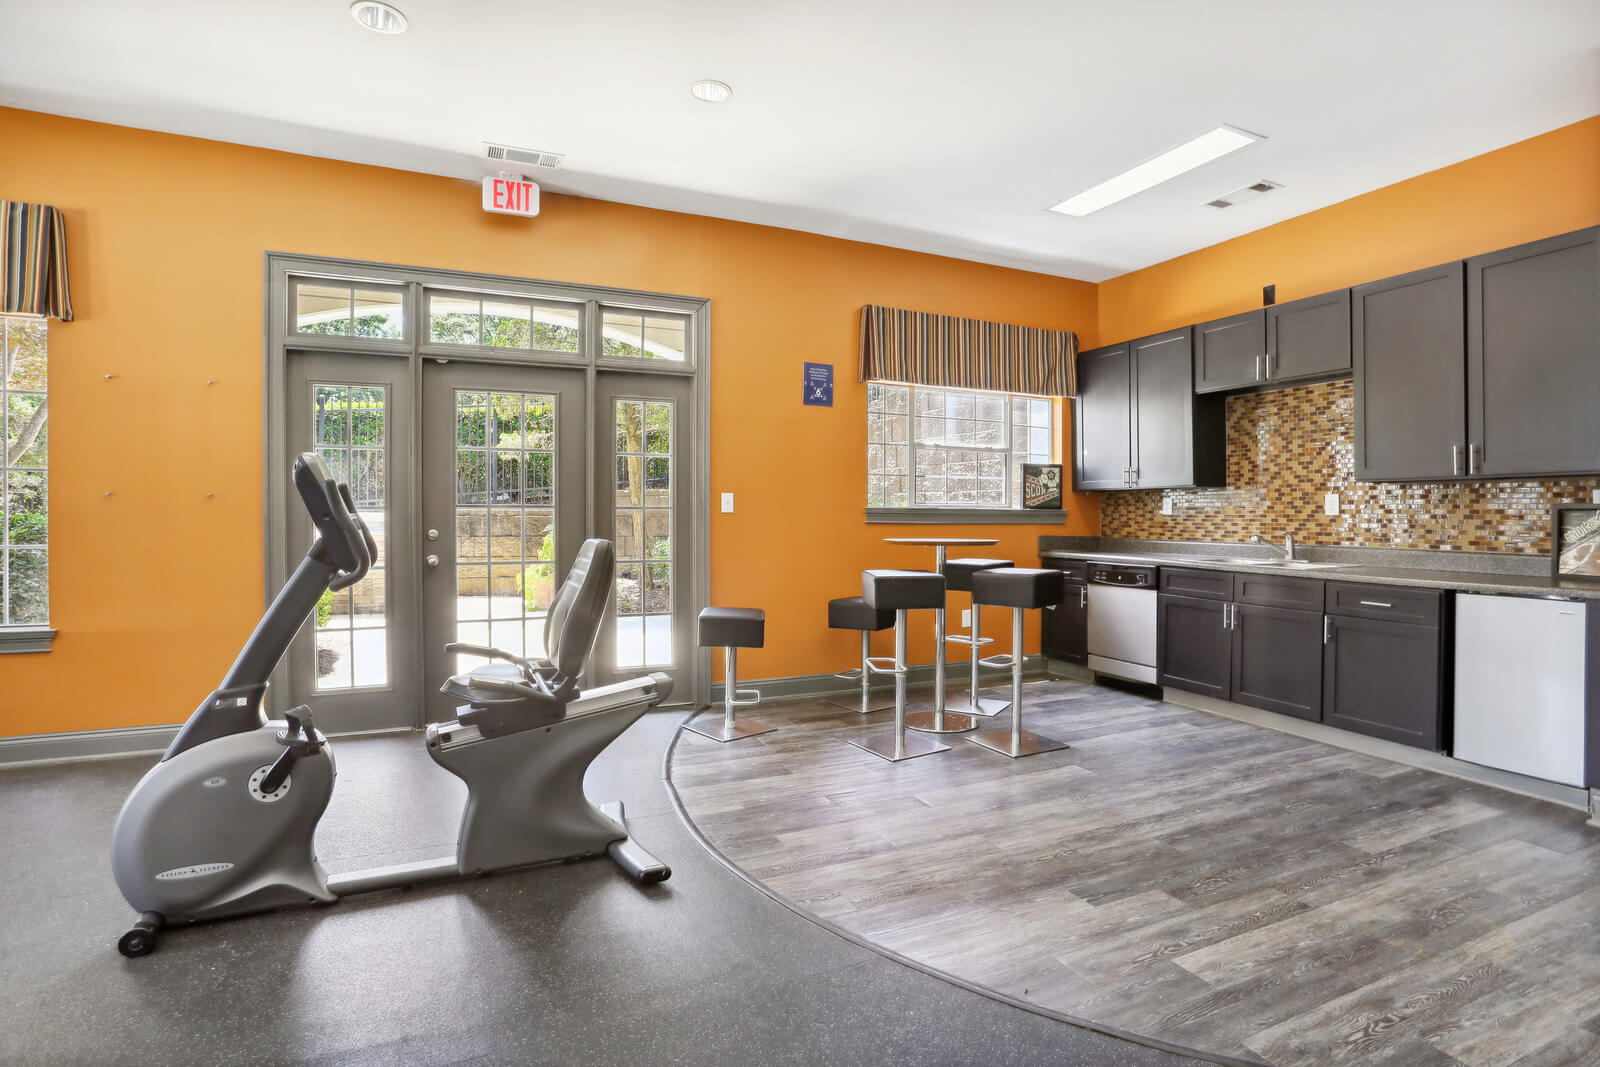 24-Hour, Fully Equipped Fitness Center with Strength Training Equipment